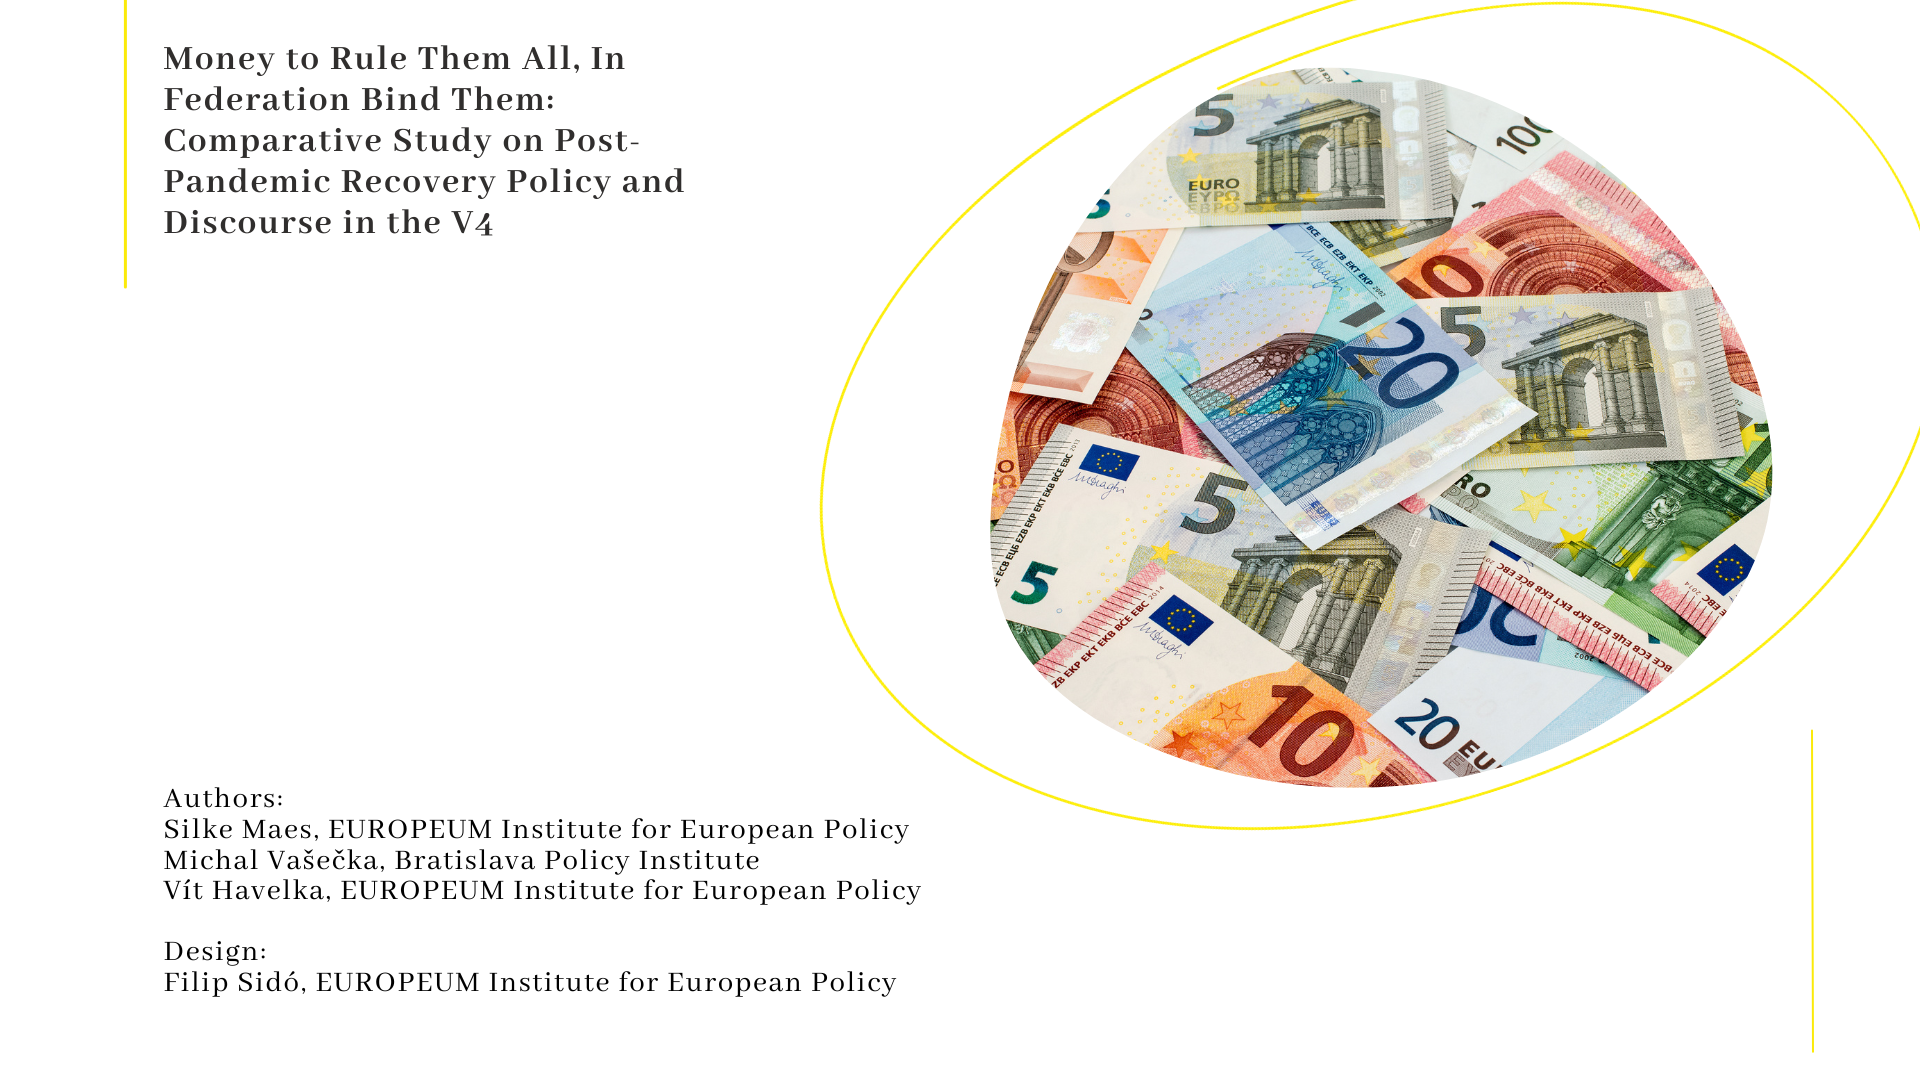 Money to Rule Them All, In Federation Bind Them: Comparative Study on Post-Pandemic Recovery Policy and Discourse in the V4